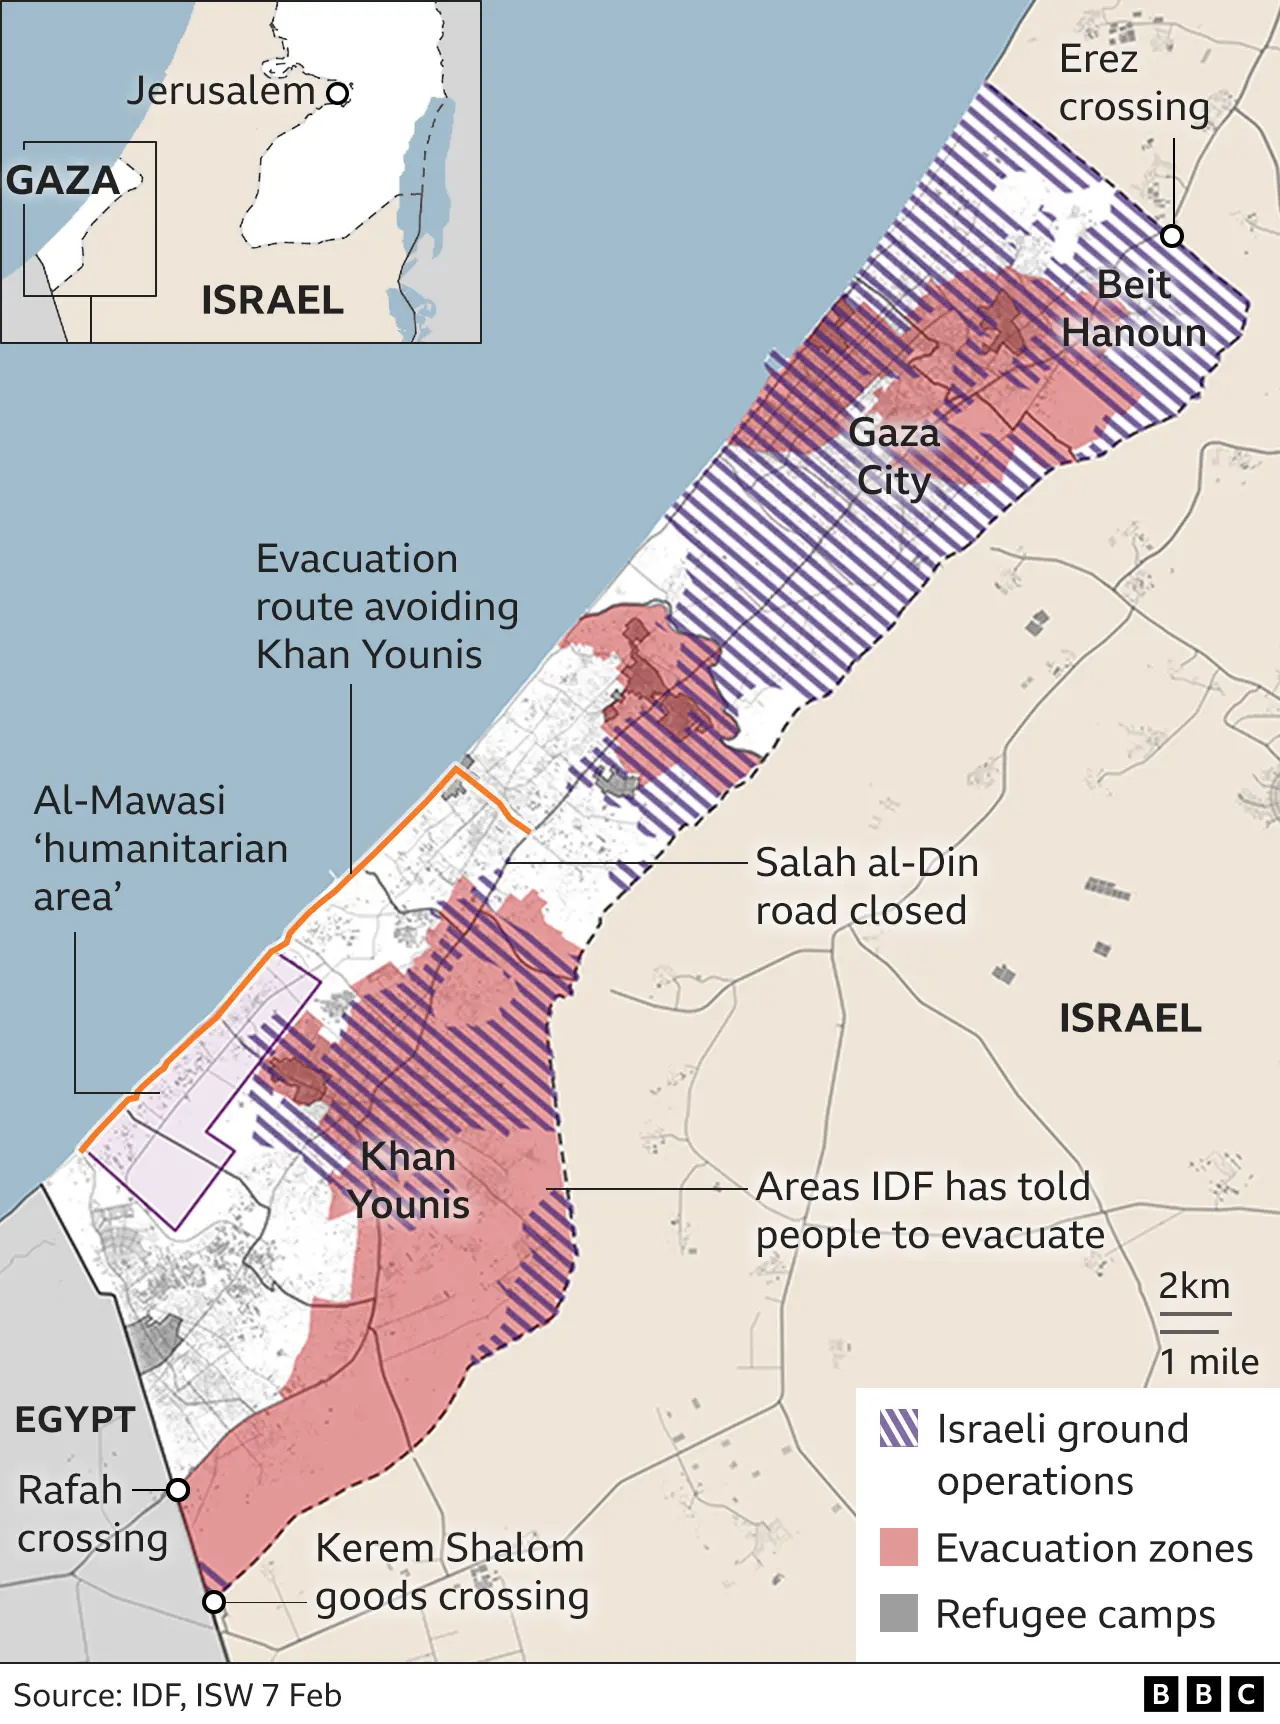 A BBC map of Gaza showing areas of Israeli ground operations, evacuation zones, refugee camps and the al-Mawasi "humanitarian area"